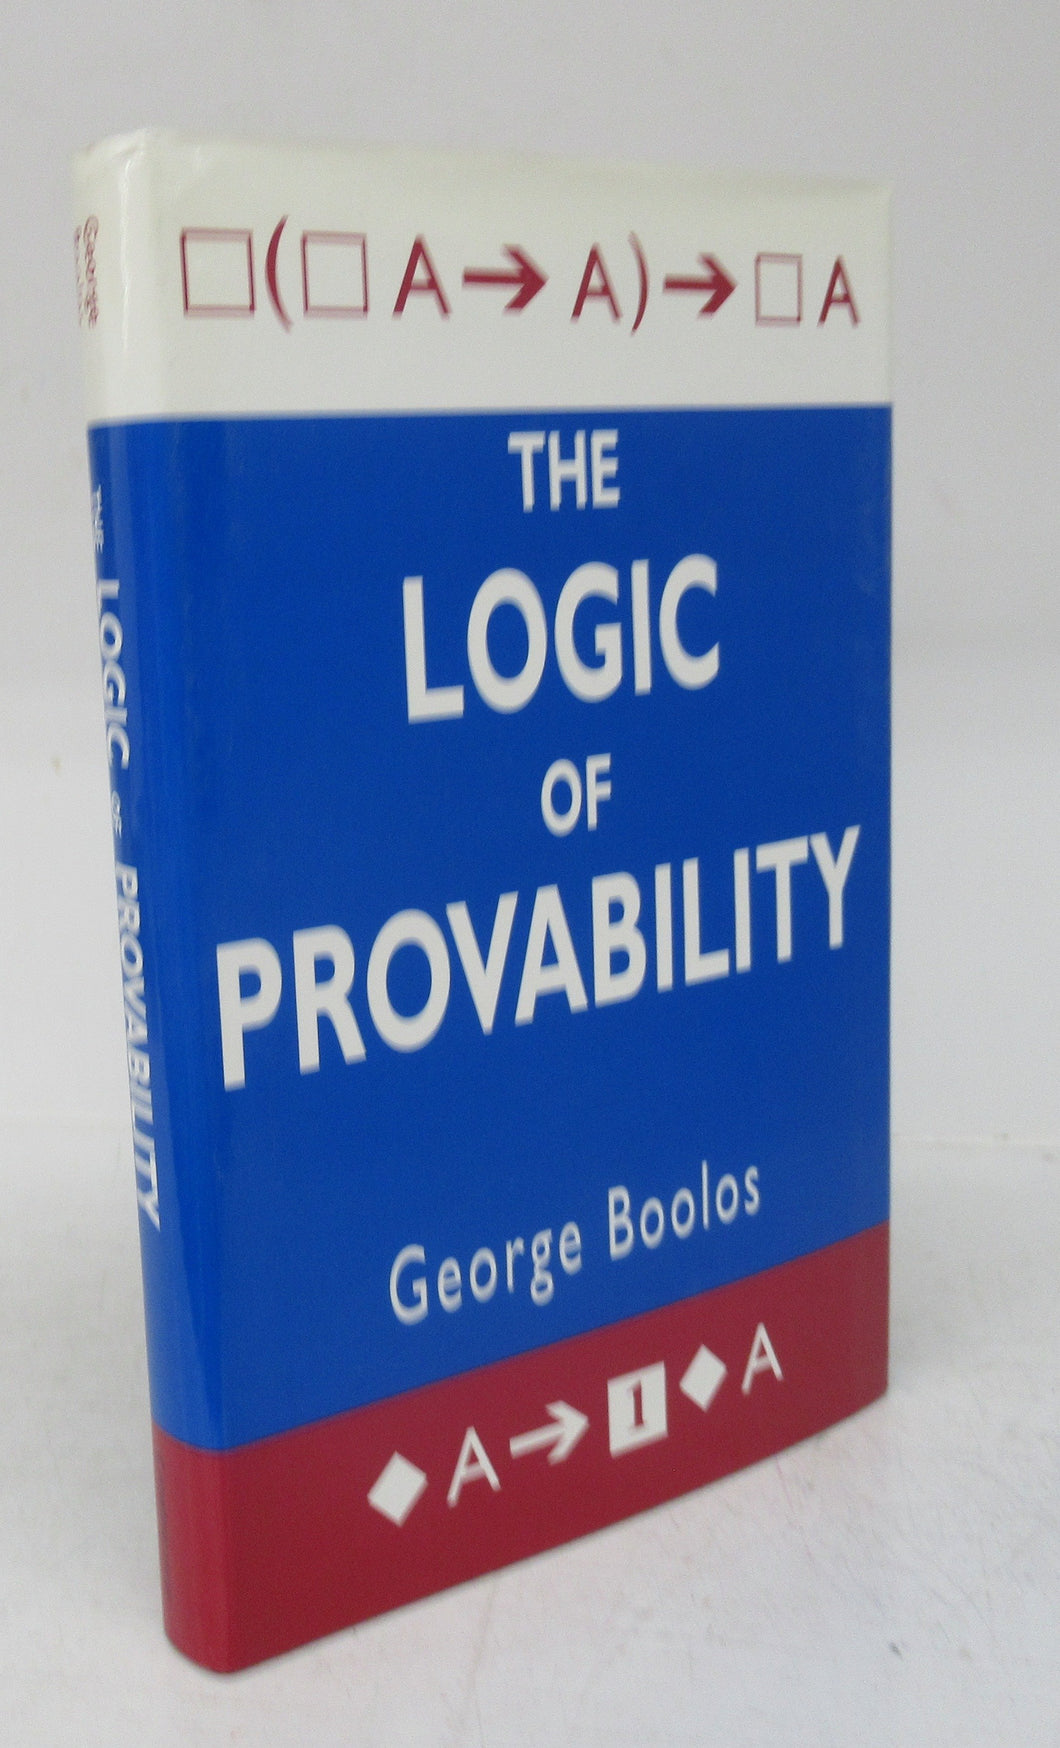 The Logic of Provability